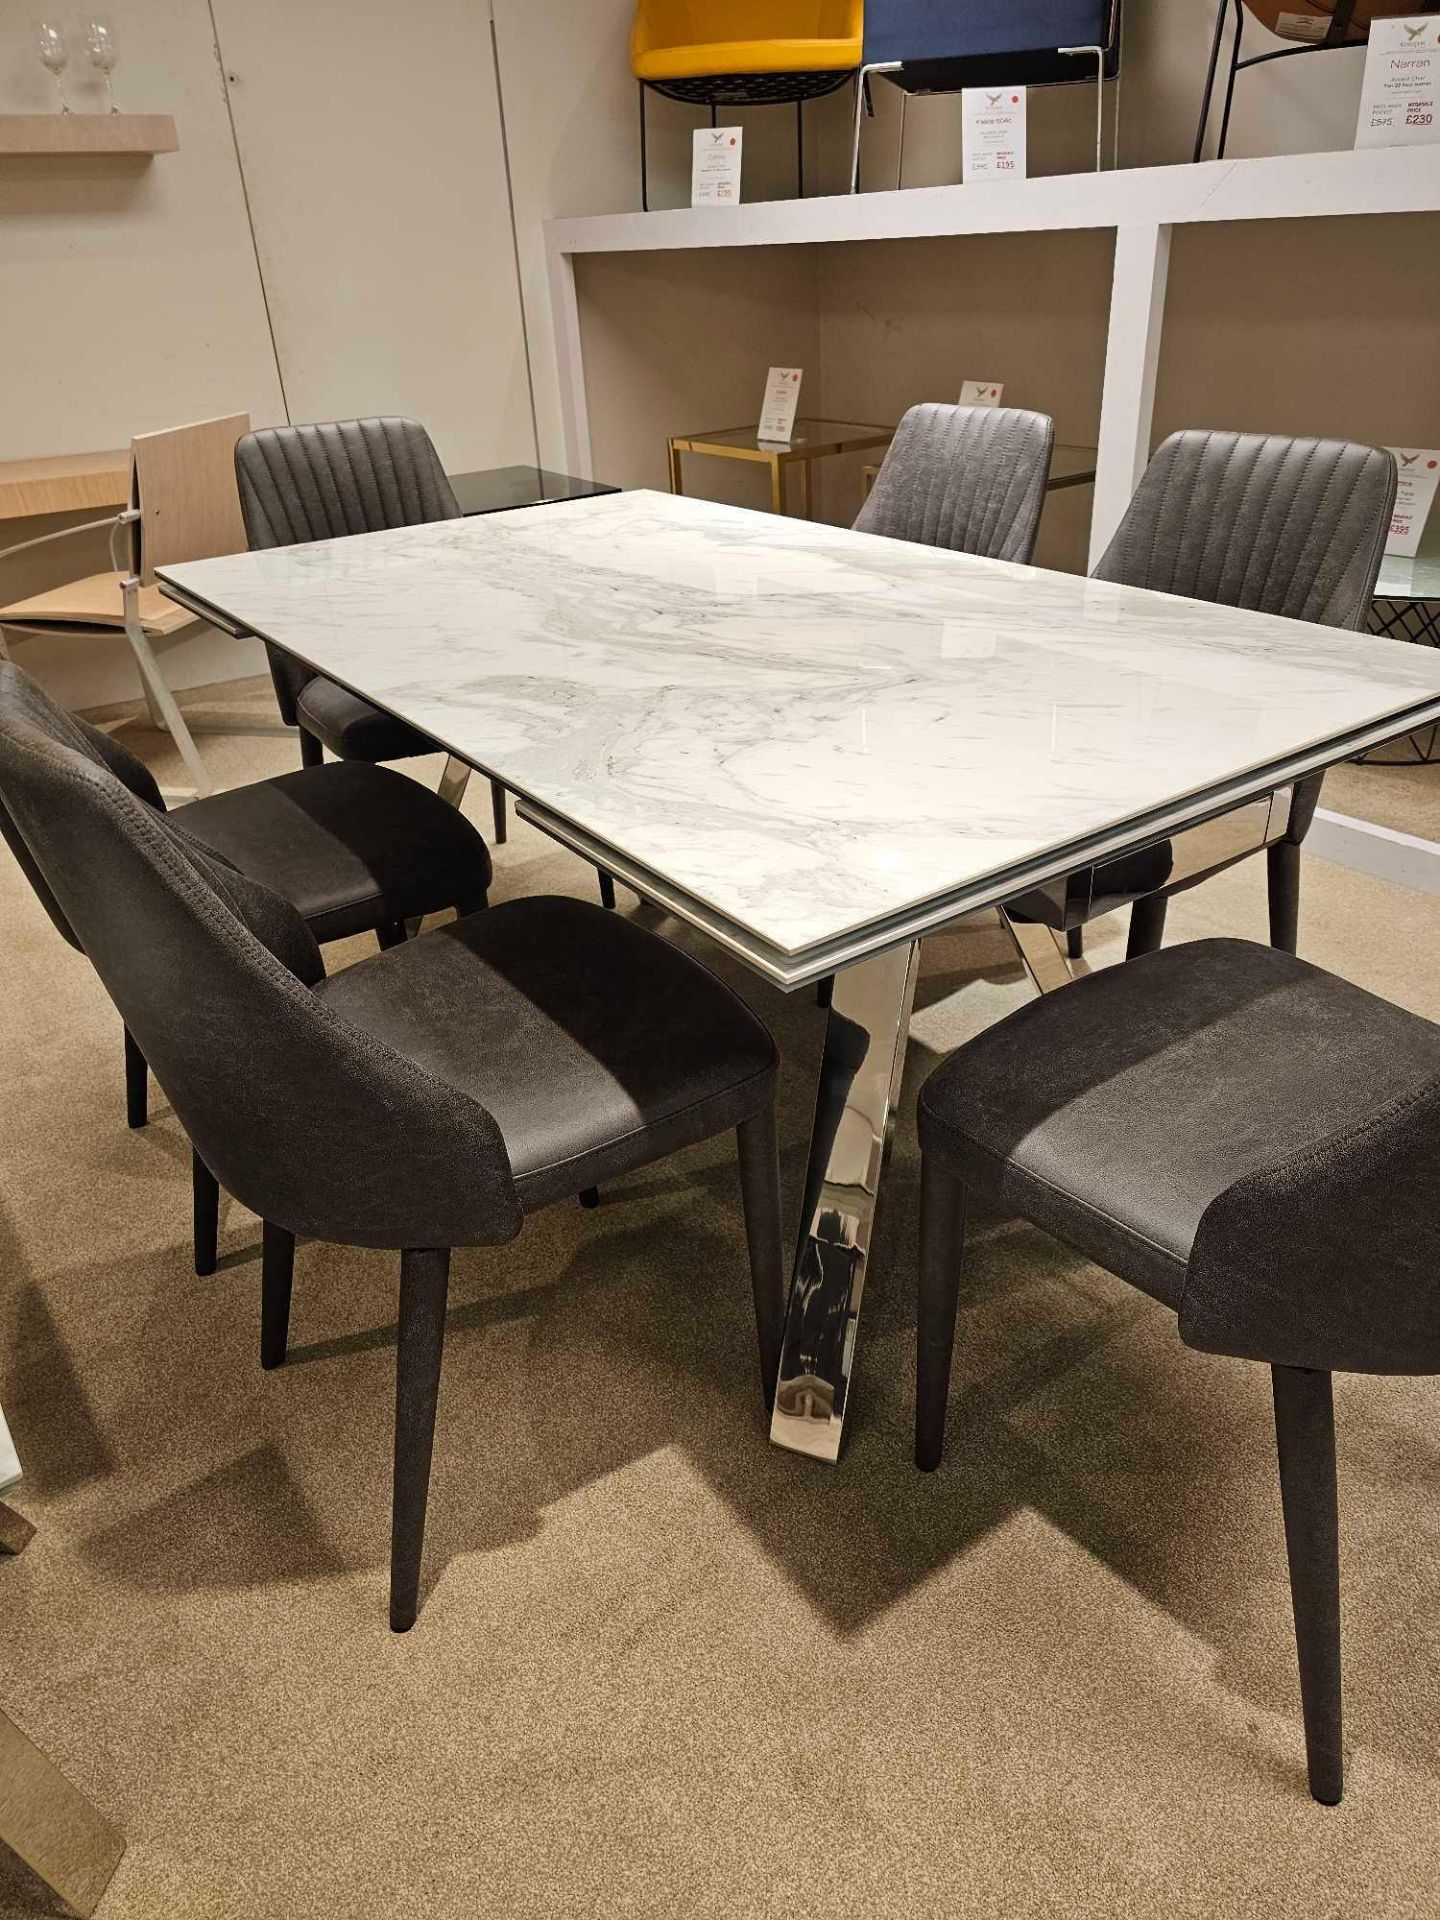 Stromboli Dining Table by Kesterport This glamorous contemporary dining table will add sensational